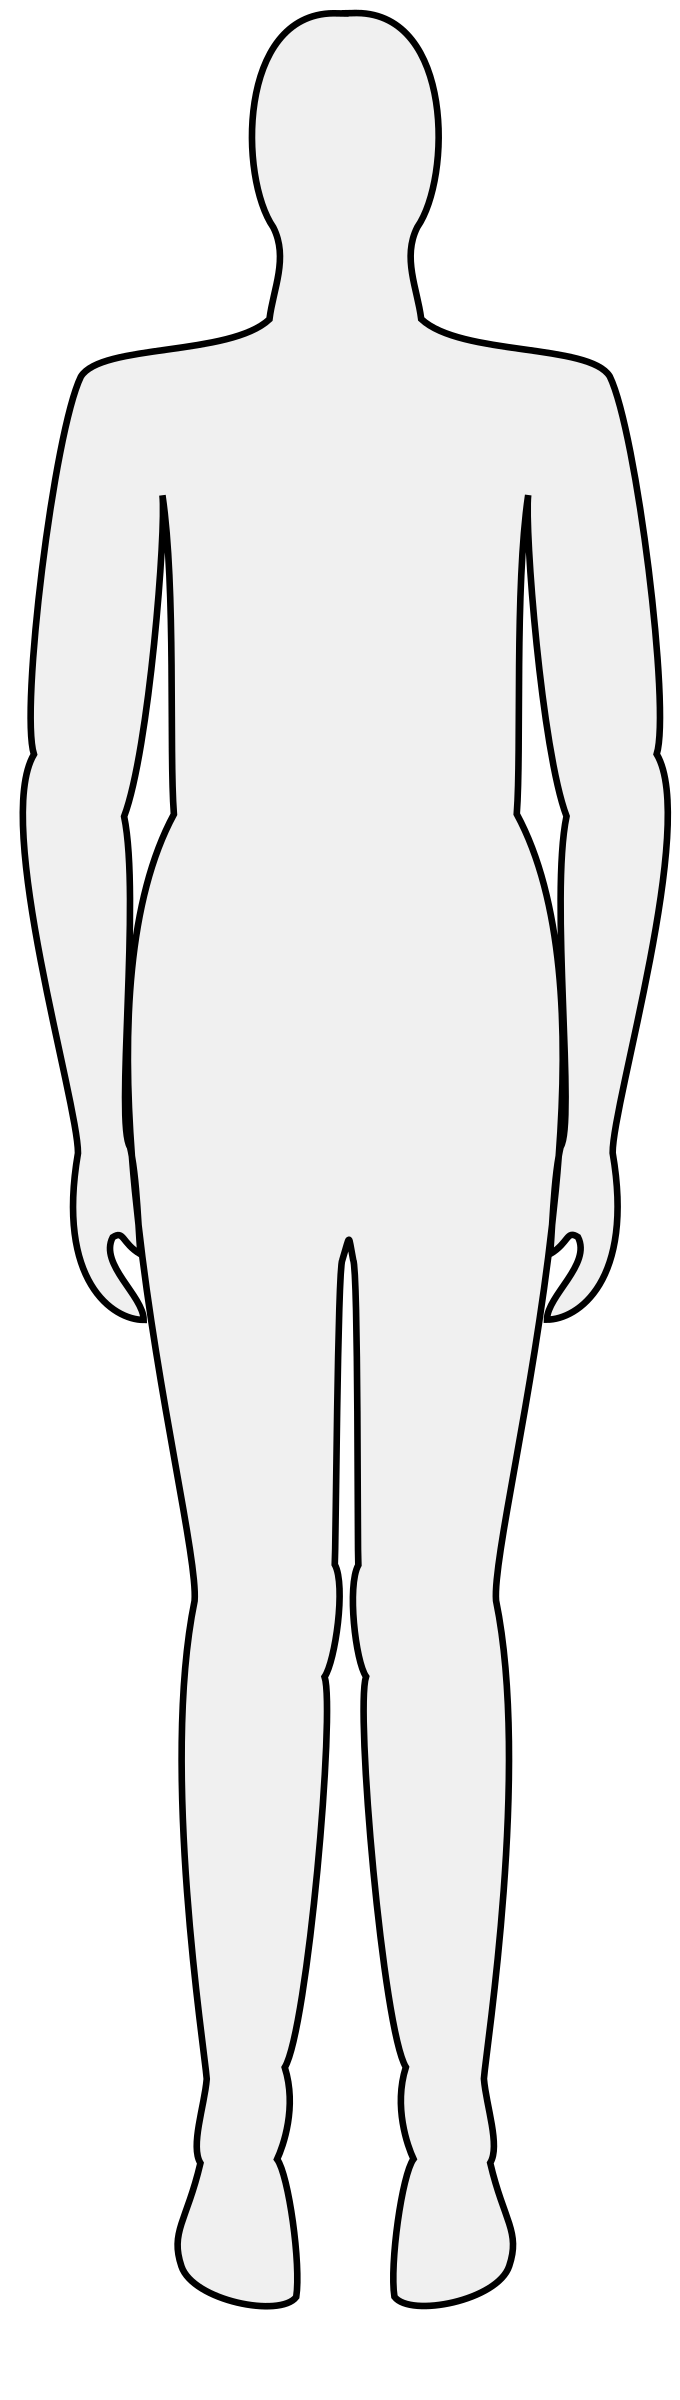 Male Body Silhouette By Mlampret